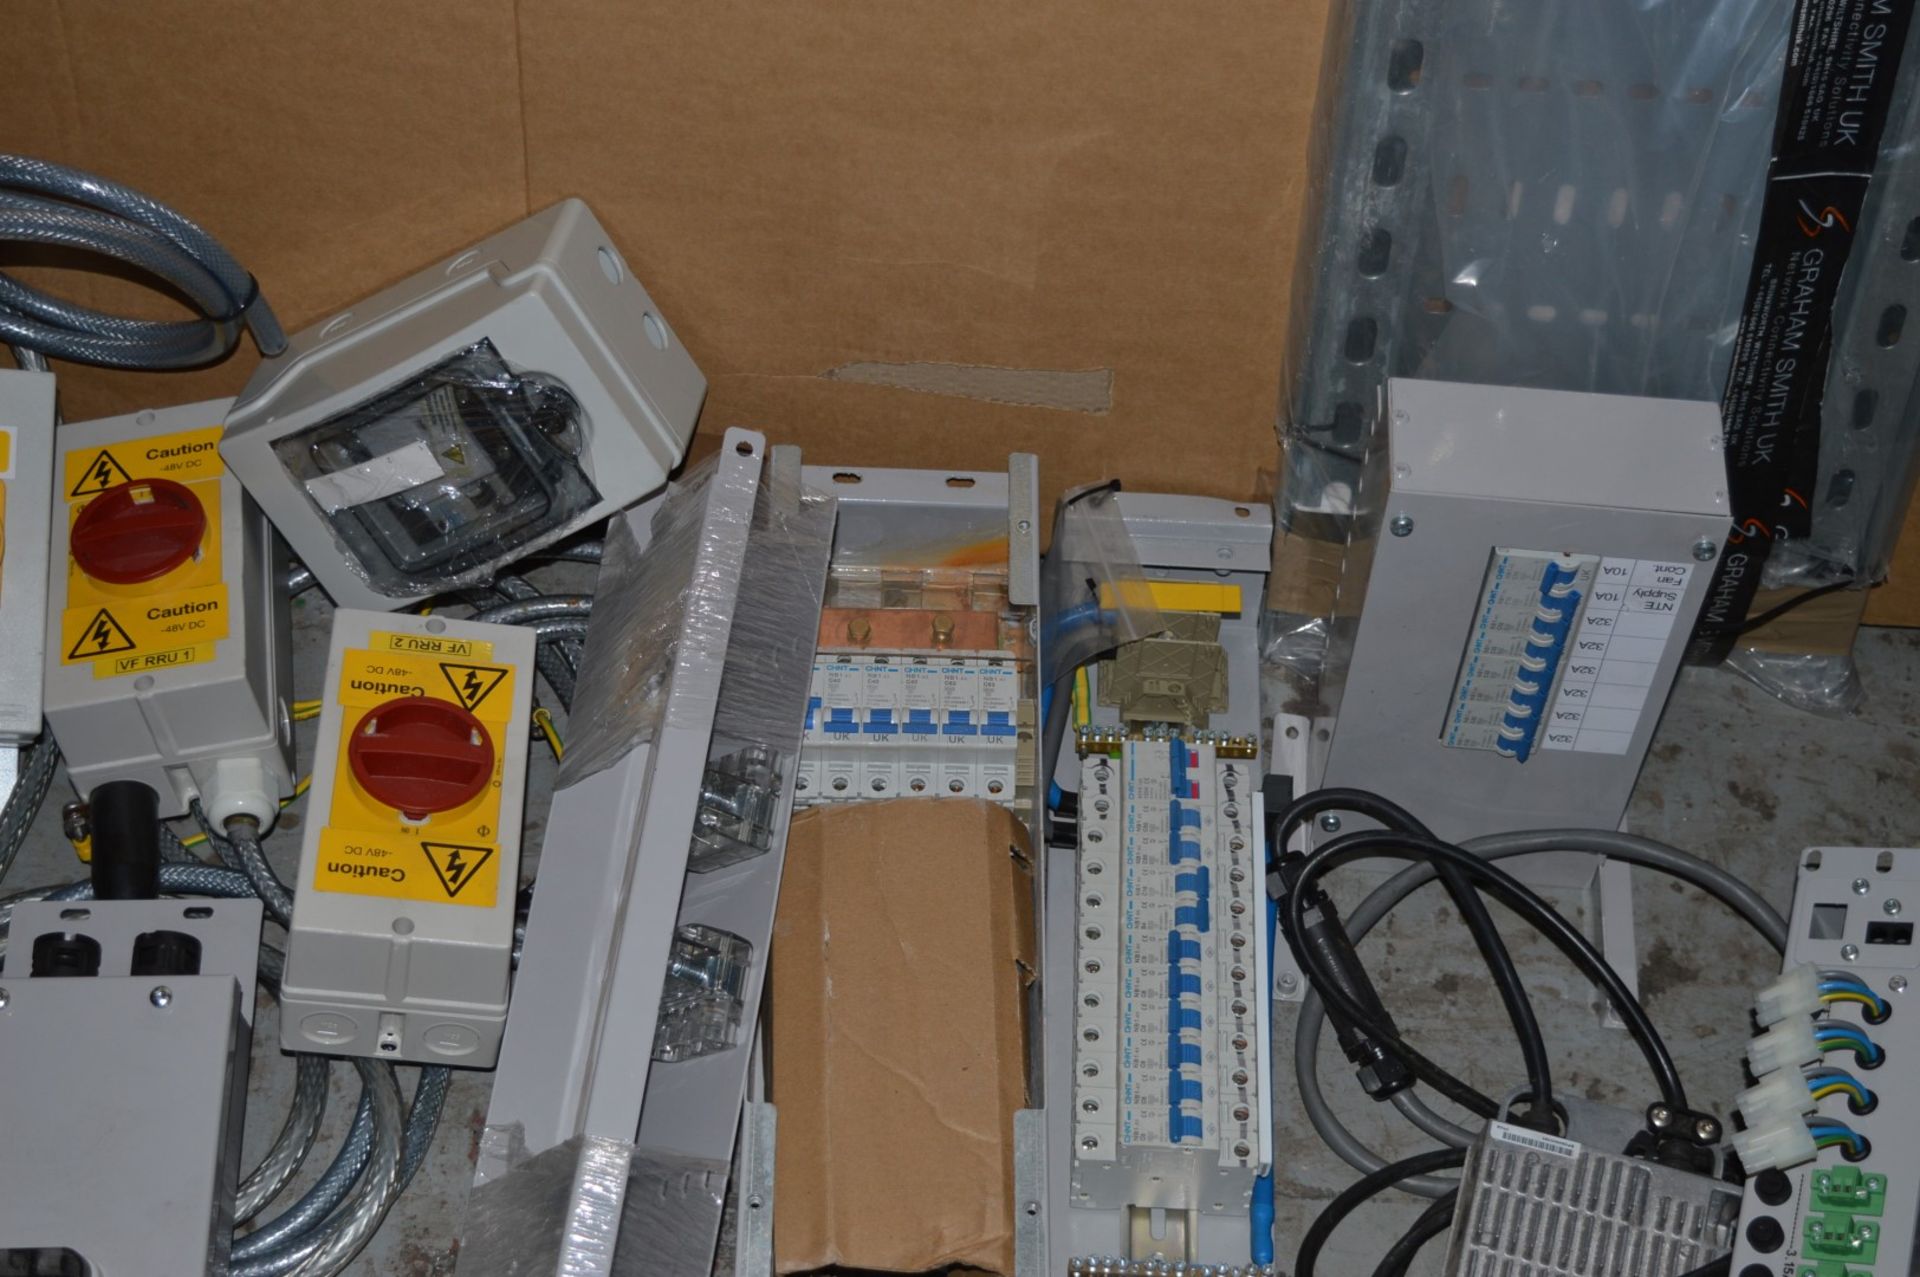 Assorted Lot of Electrical Industrial Products Including Switch Boxes, Circuit Breakers and Power - Image 7 of 21